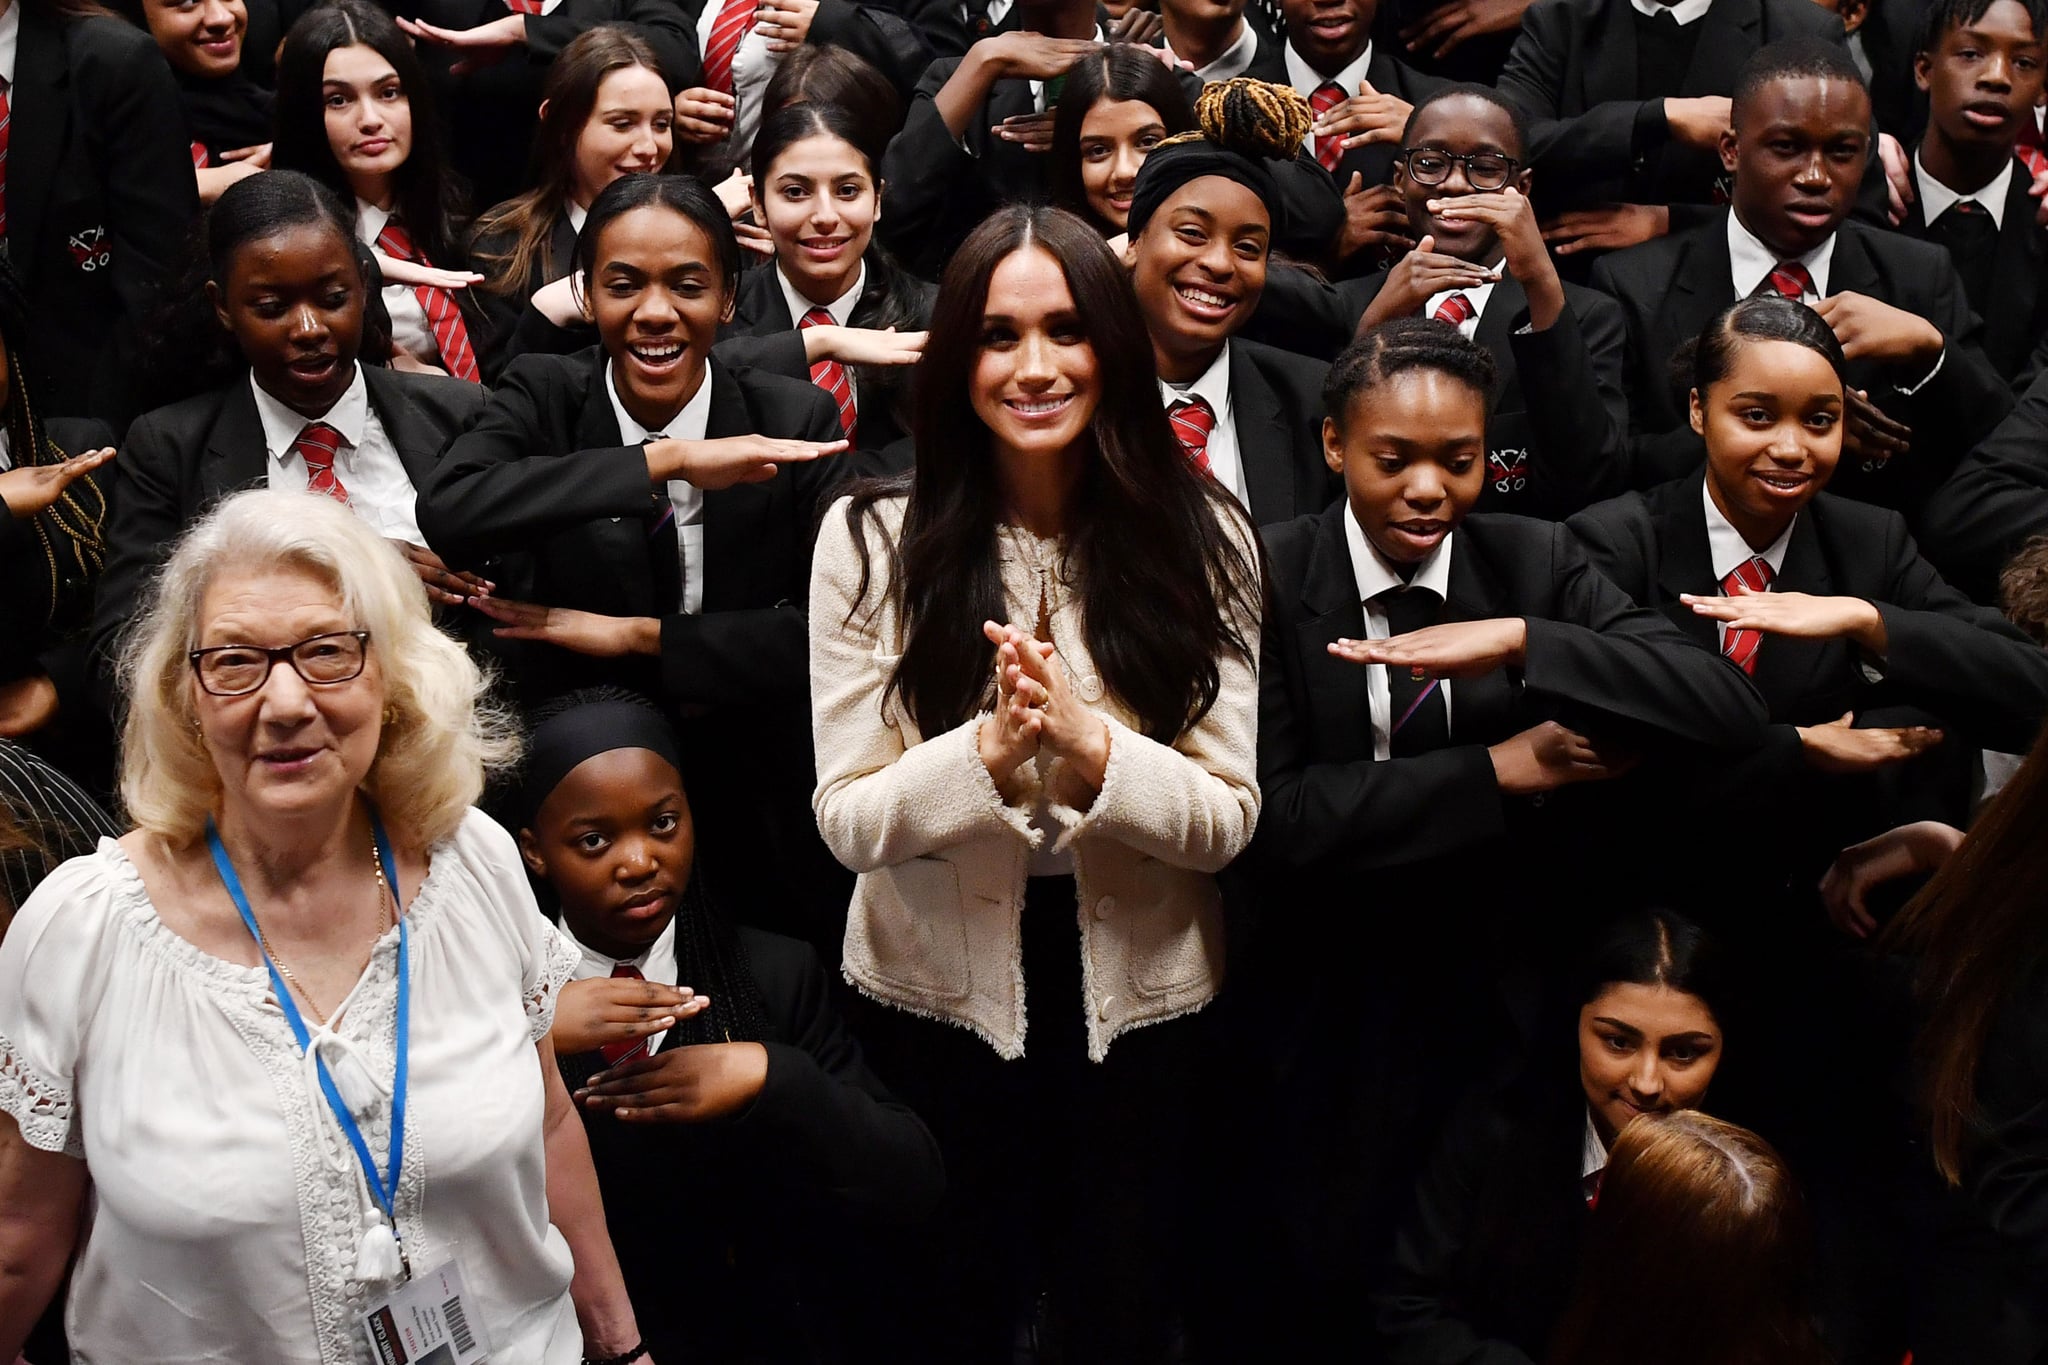 LONDON, ENGLAND - MARCH 06: (EDITOR'S NOTE: Alternative crop of image #1205706931) Meghan, Duchess of Sussex poses with school children making the 'Equality' sign following a school assembly during a visit to Robert Clack School in Dagenham to attend a special assembly ahead of International Women's Day (IWD) held on Sunday 8th March, on March 6, 2020 in London, England.   (Photo by Ben Stansall-WPA Pool/Getty Images)